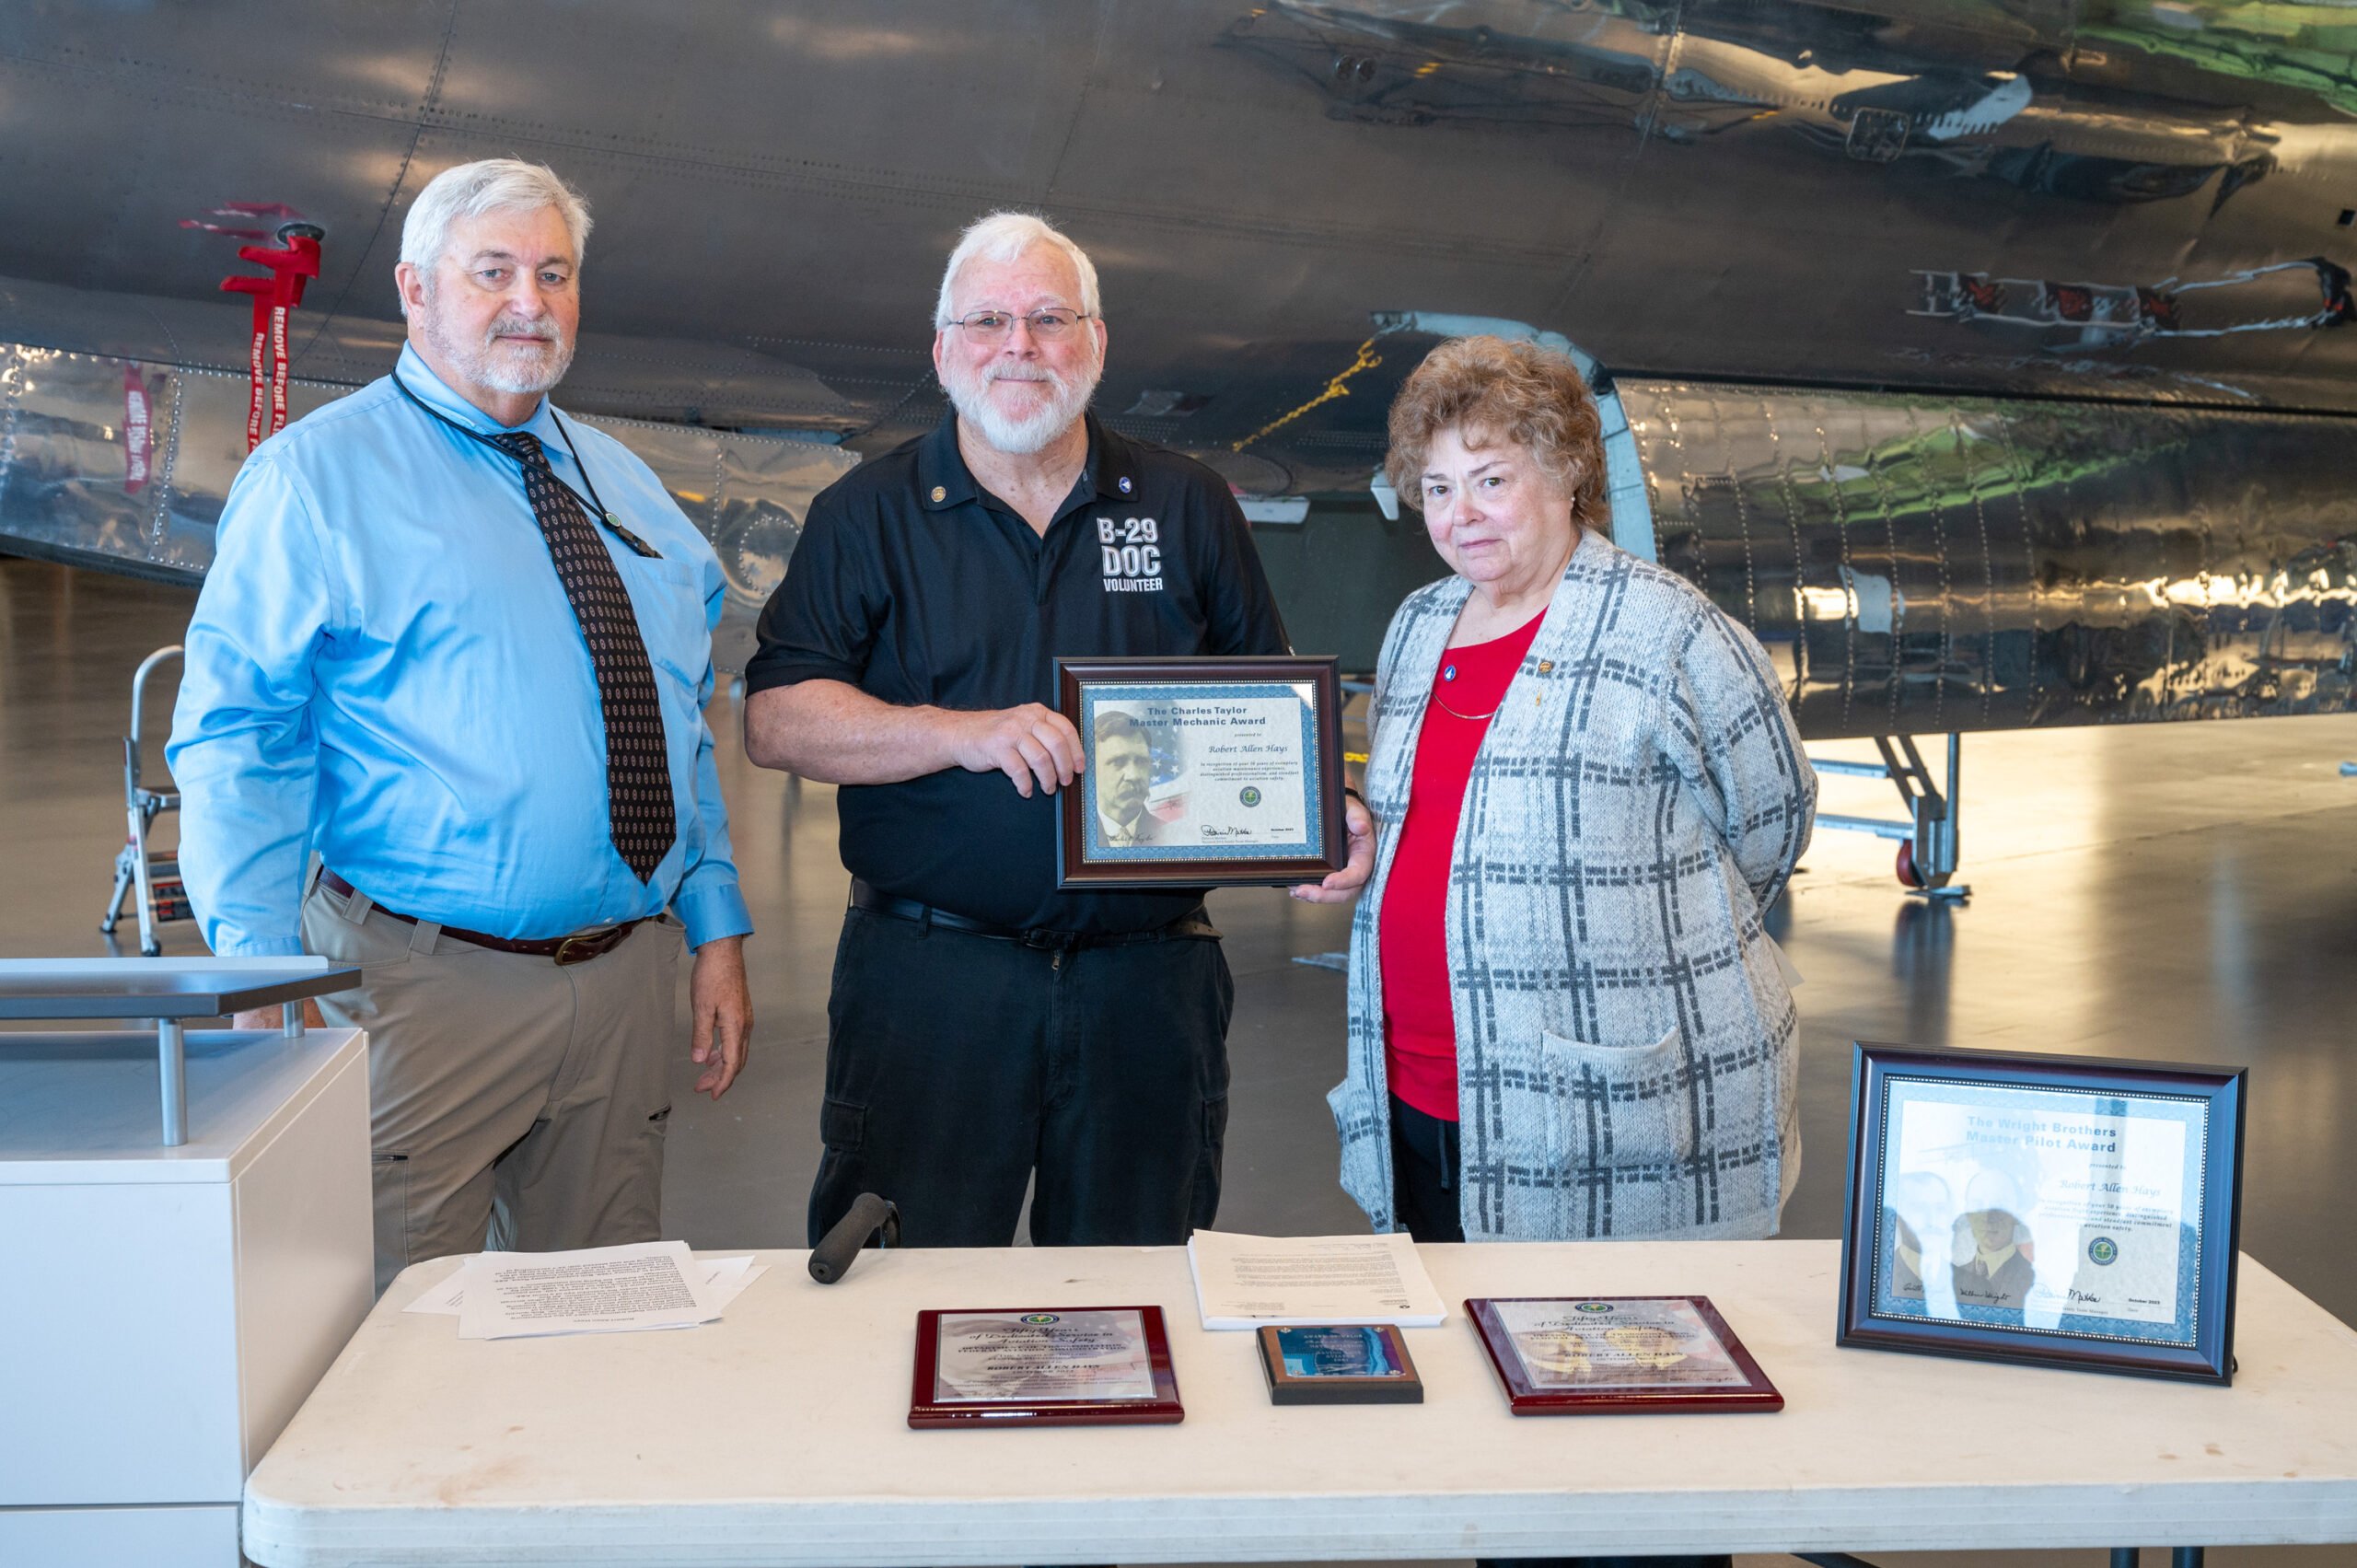 Photo: Bob Hays receives FAA recognition